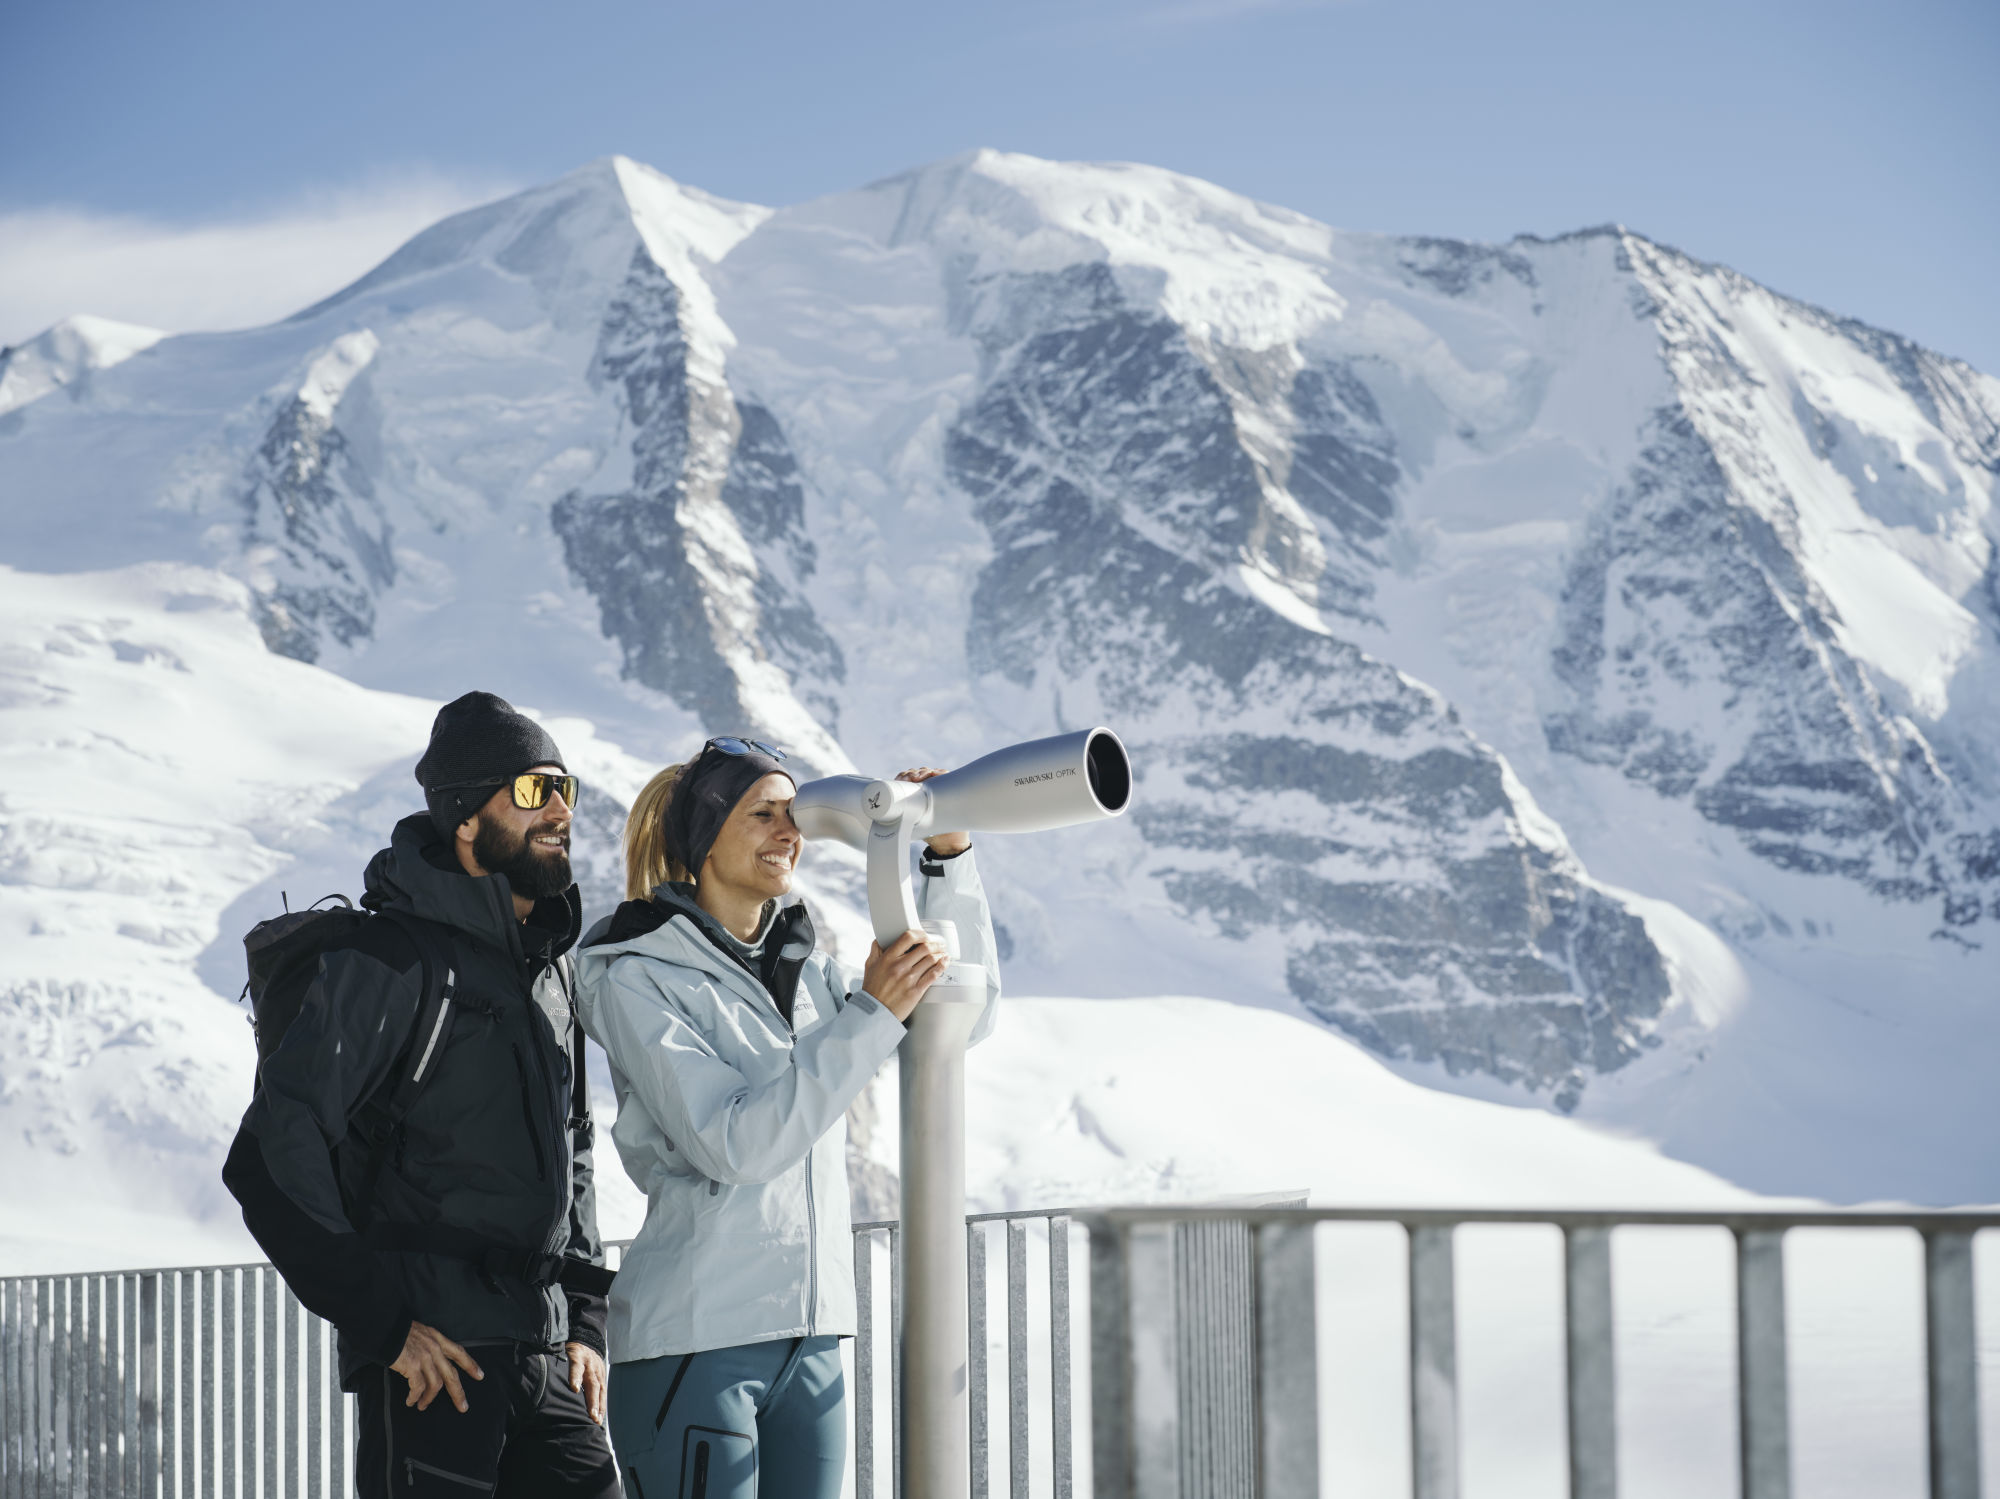 The ST Vista outdoor spotting scope provides breathtaking viewpoints in Diavolezza, Switzerland.